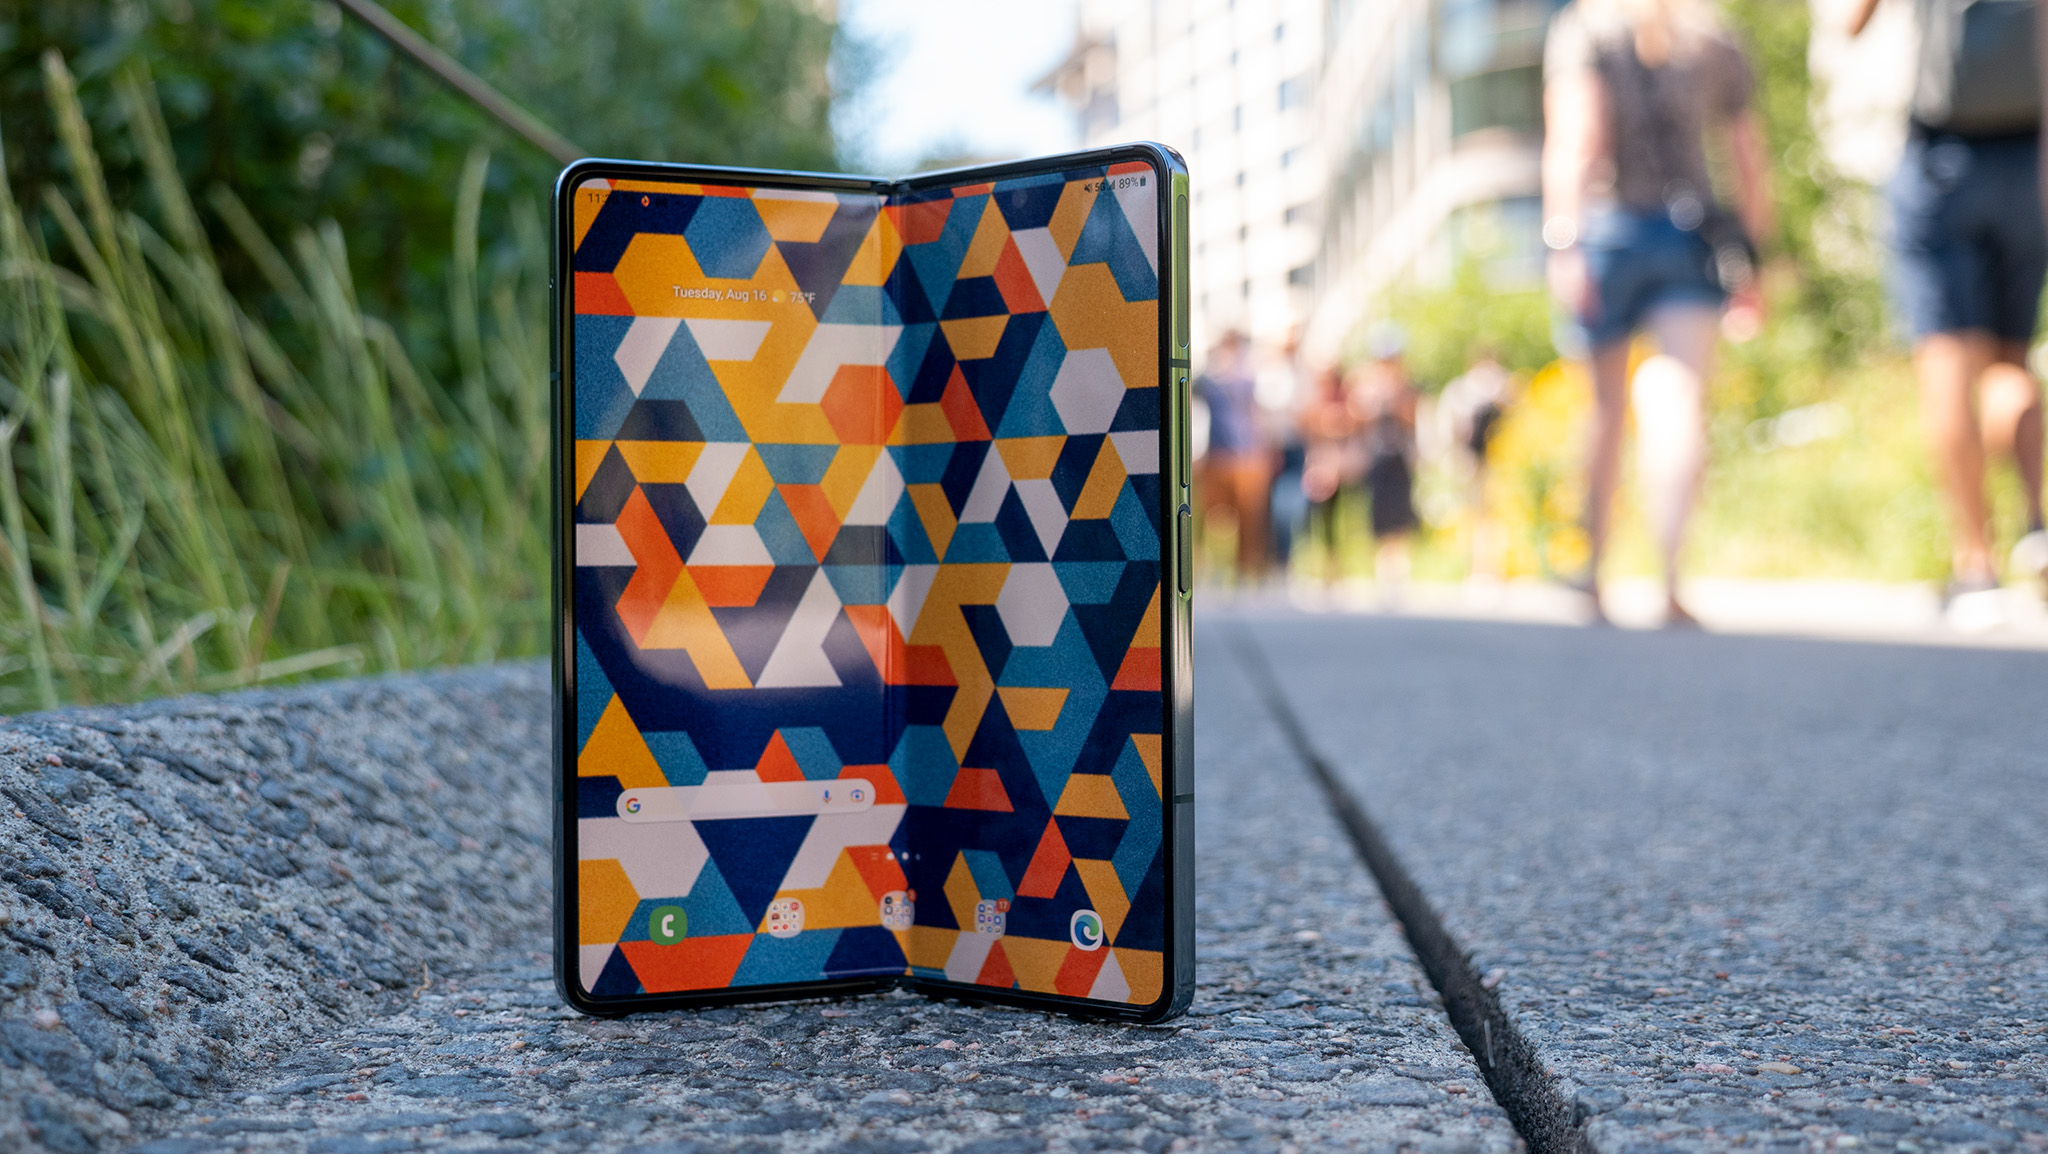 The Samsung Galaxy Z Fold 4 tented on a sidewalk with pedestrians in the background